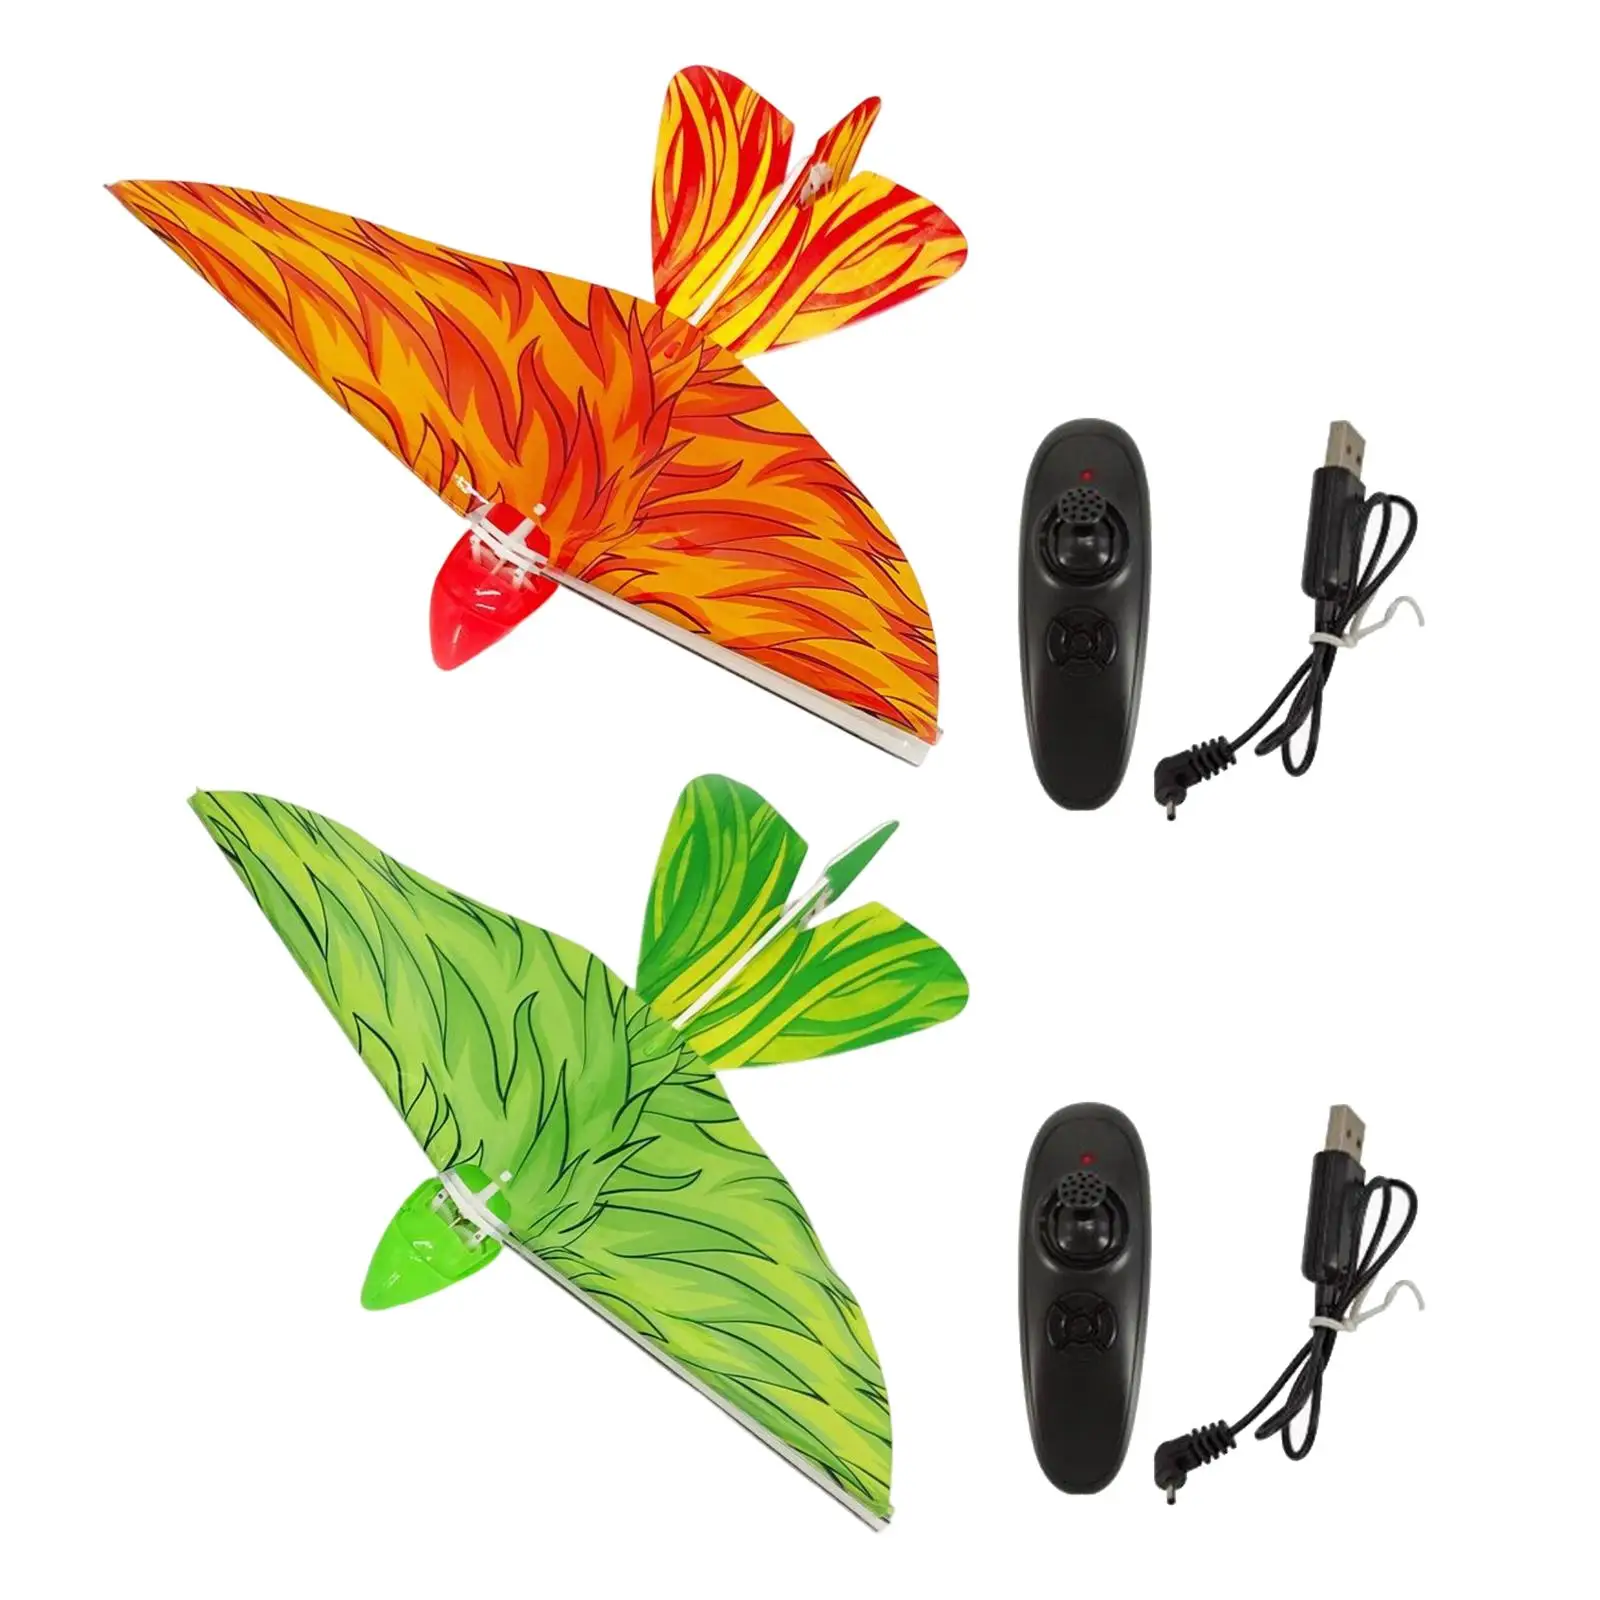 Simulation Bird RC Flying Toys  Down Hover Altitude Hold for Beginners